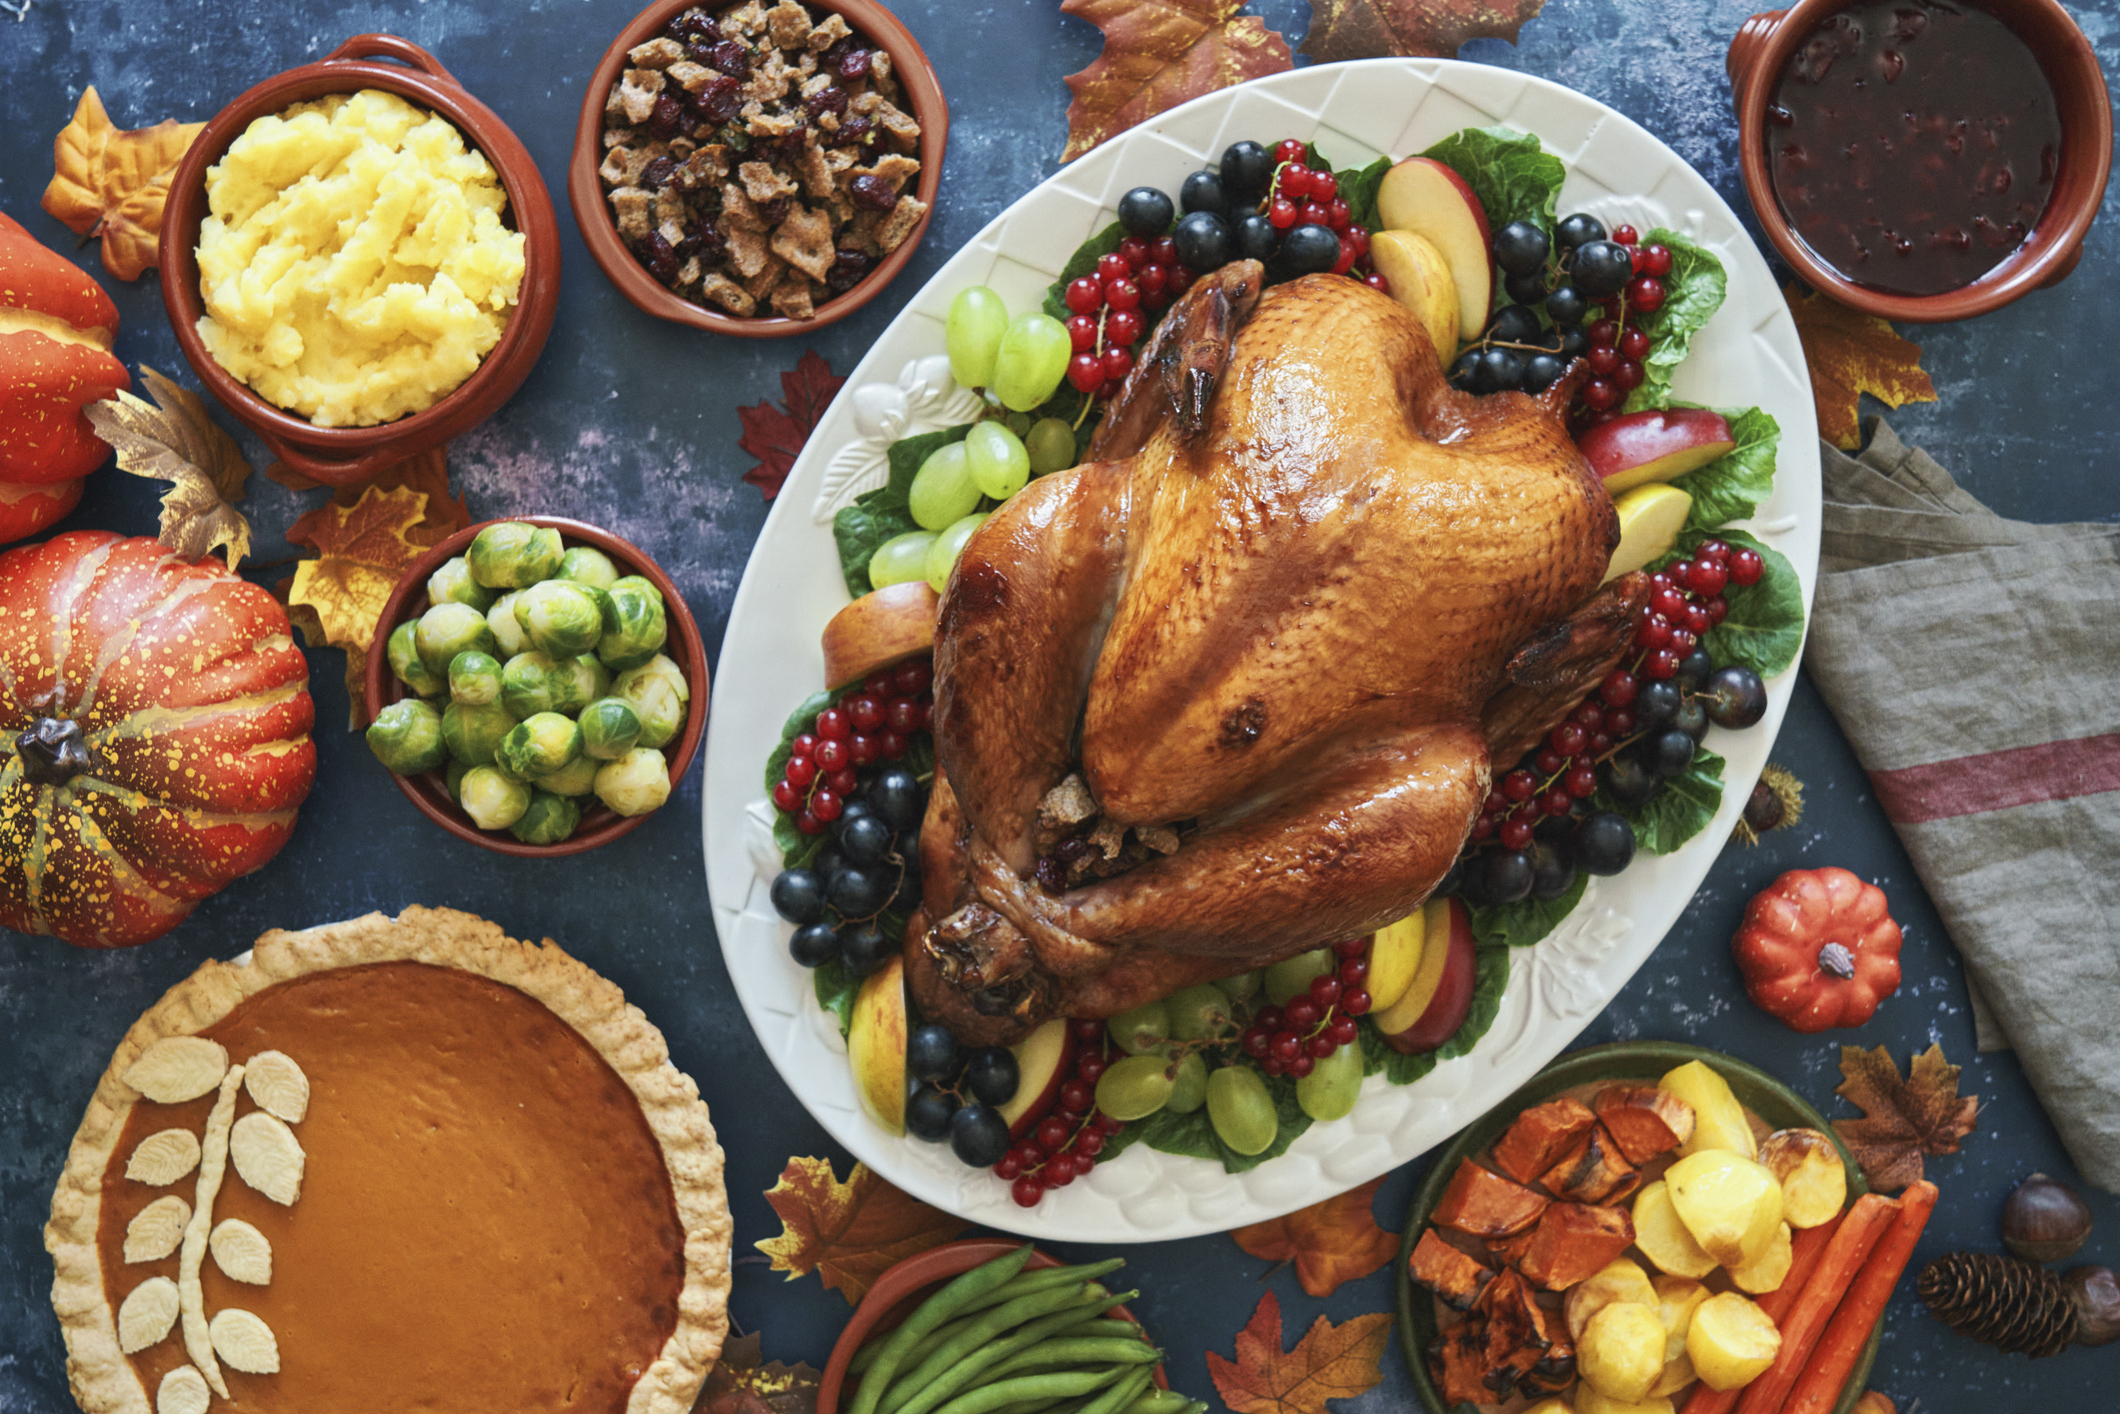 Thanksgiving – a complex tradition – impacts students in different ways